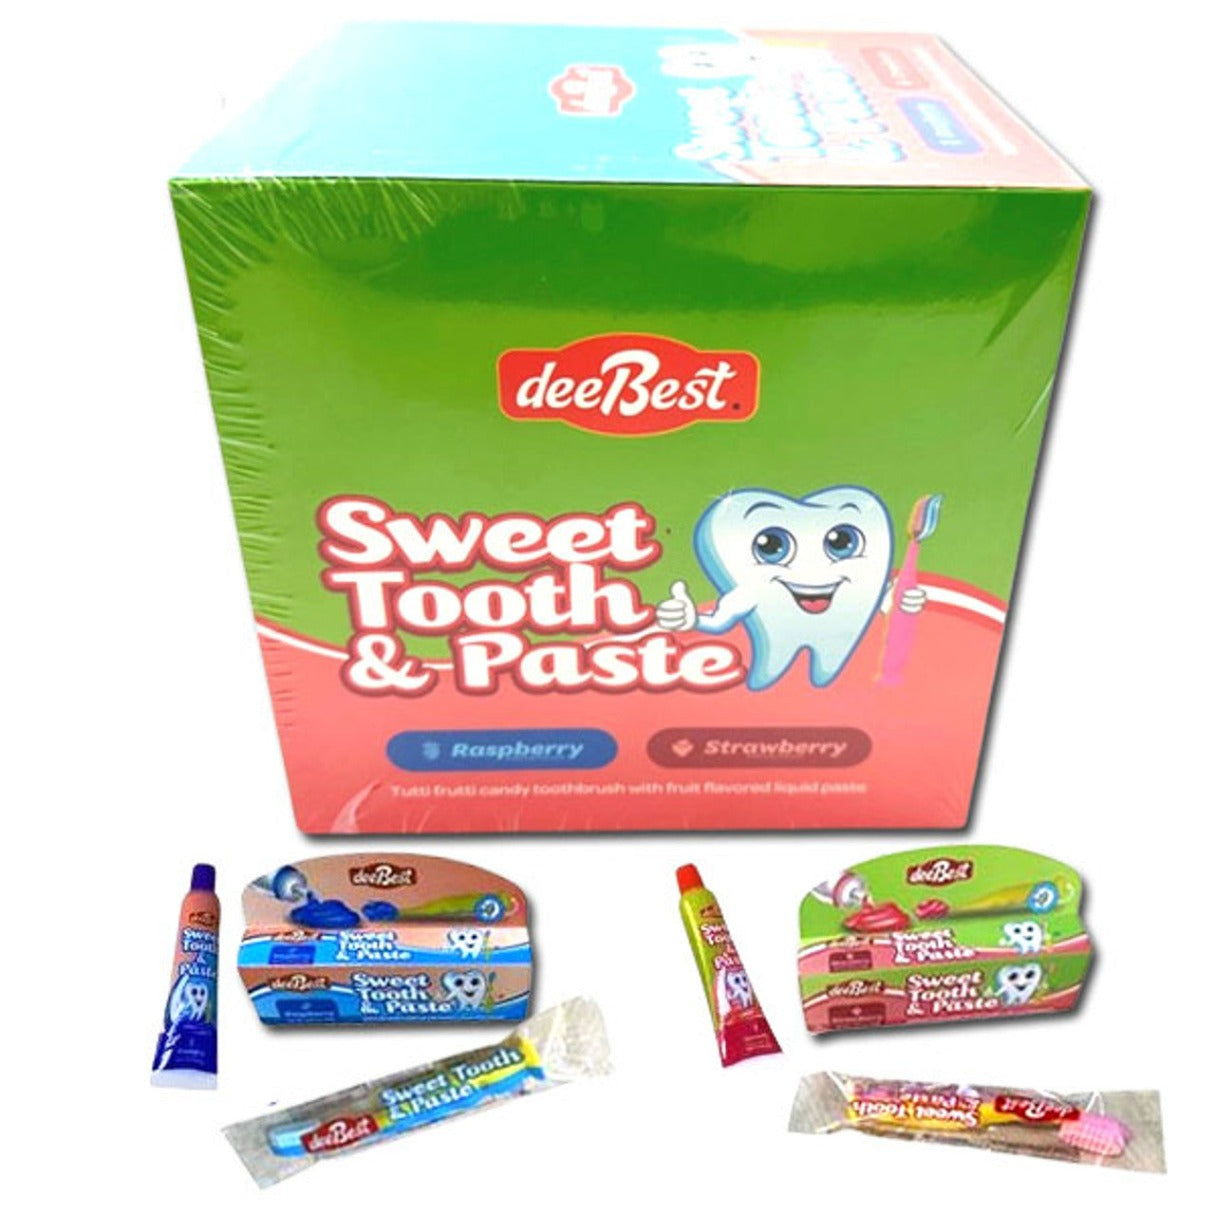 Dee Best Sweet Tooth & Paste Candy - 24ct